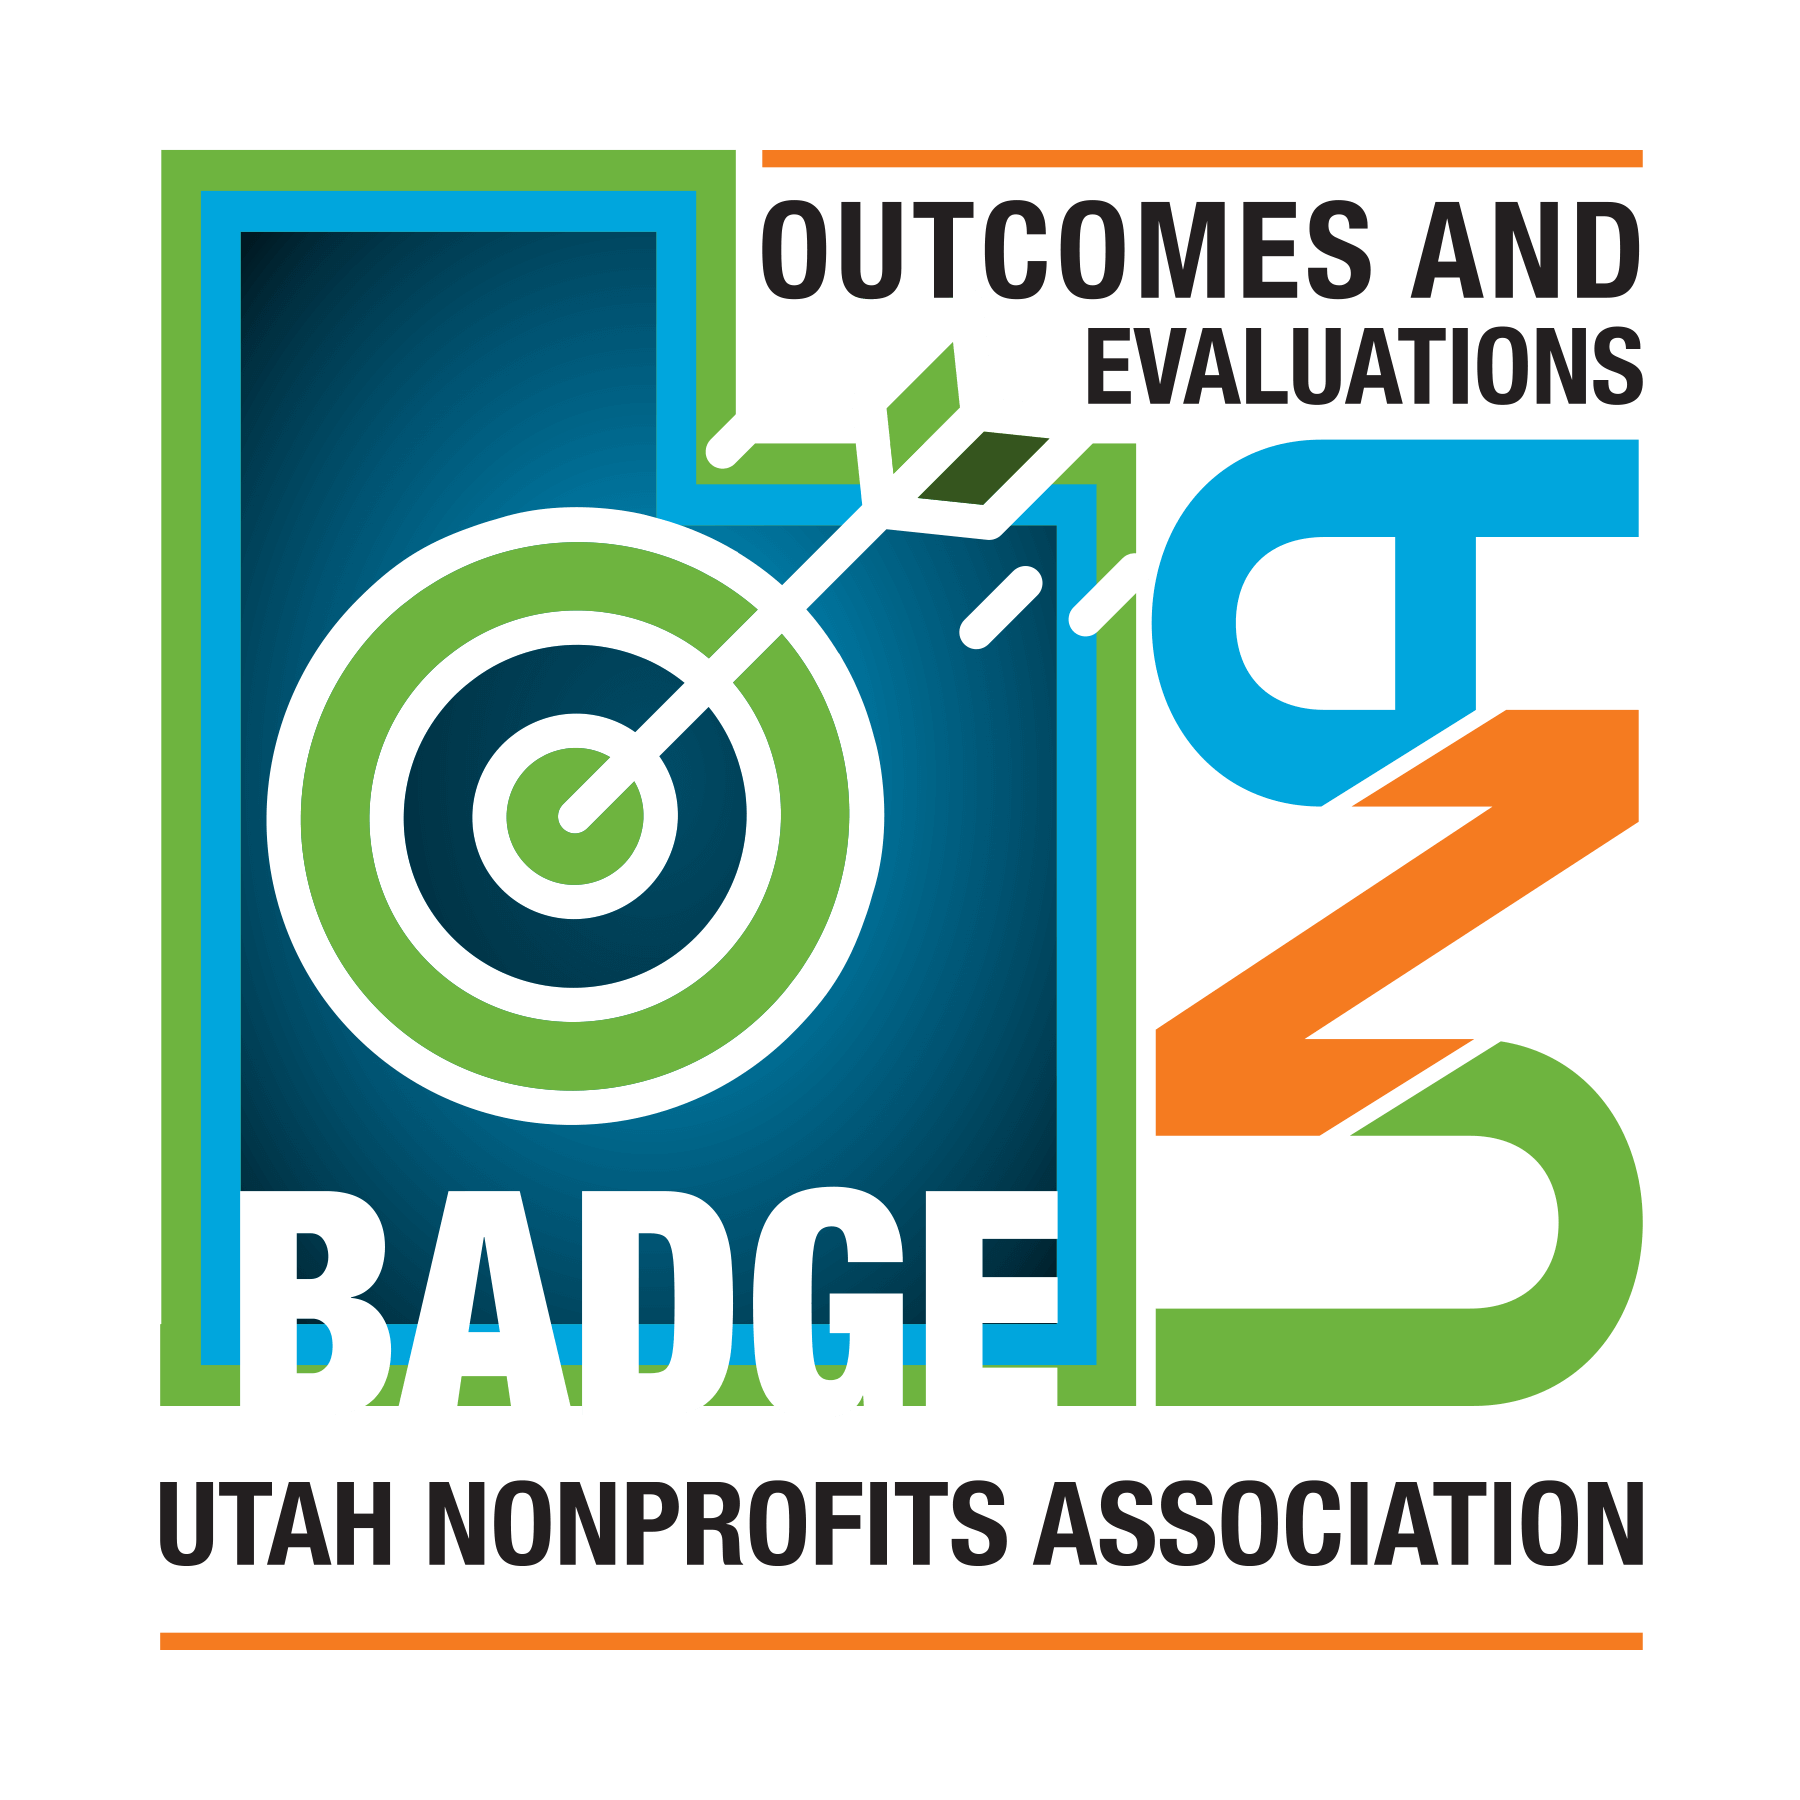 UNA Nonprofit Credential Badge for Outcomes and Evaluations